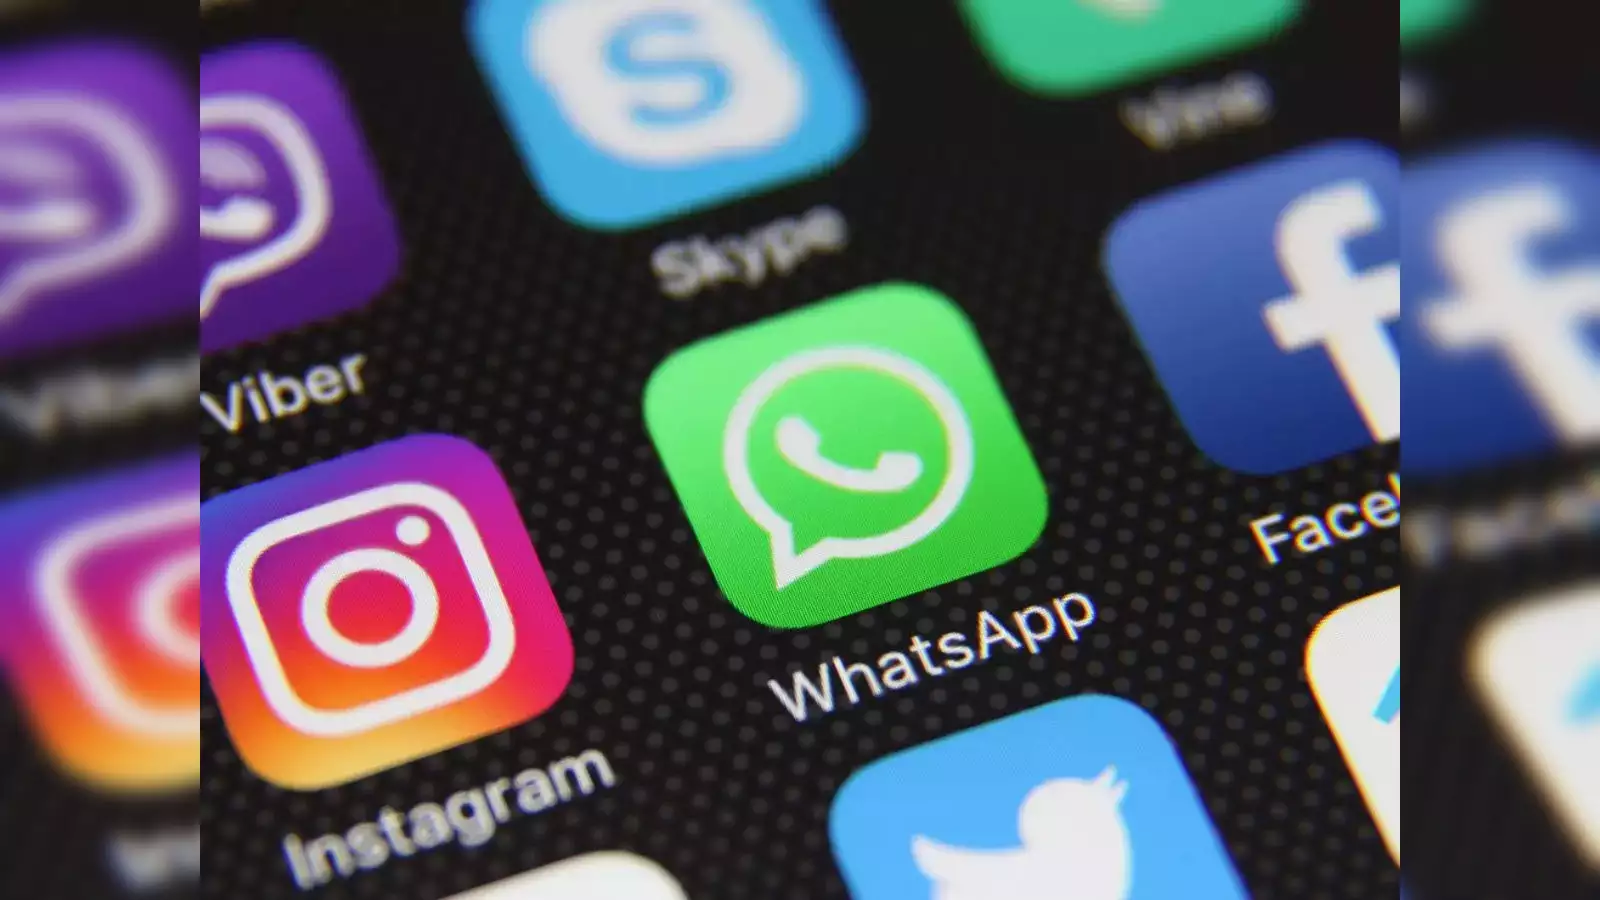 WhatsApp Introduced a New Feature That Prevents Users From Capturing Screenshots of Profile Pictures